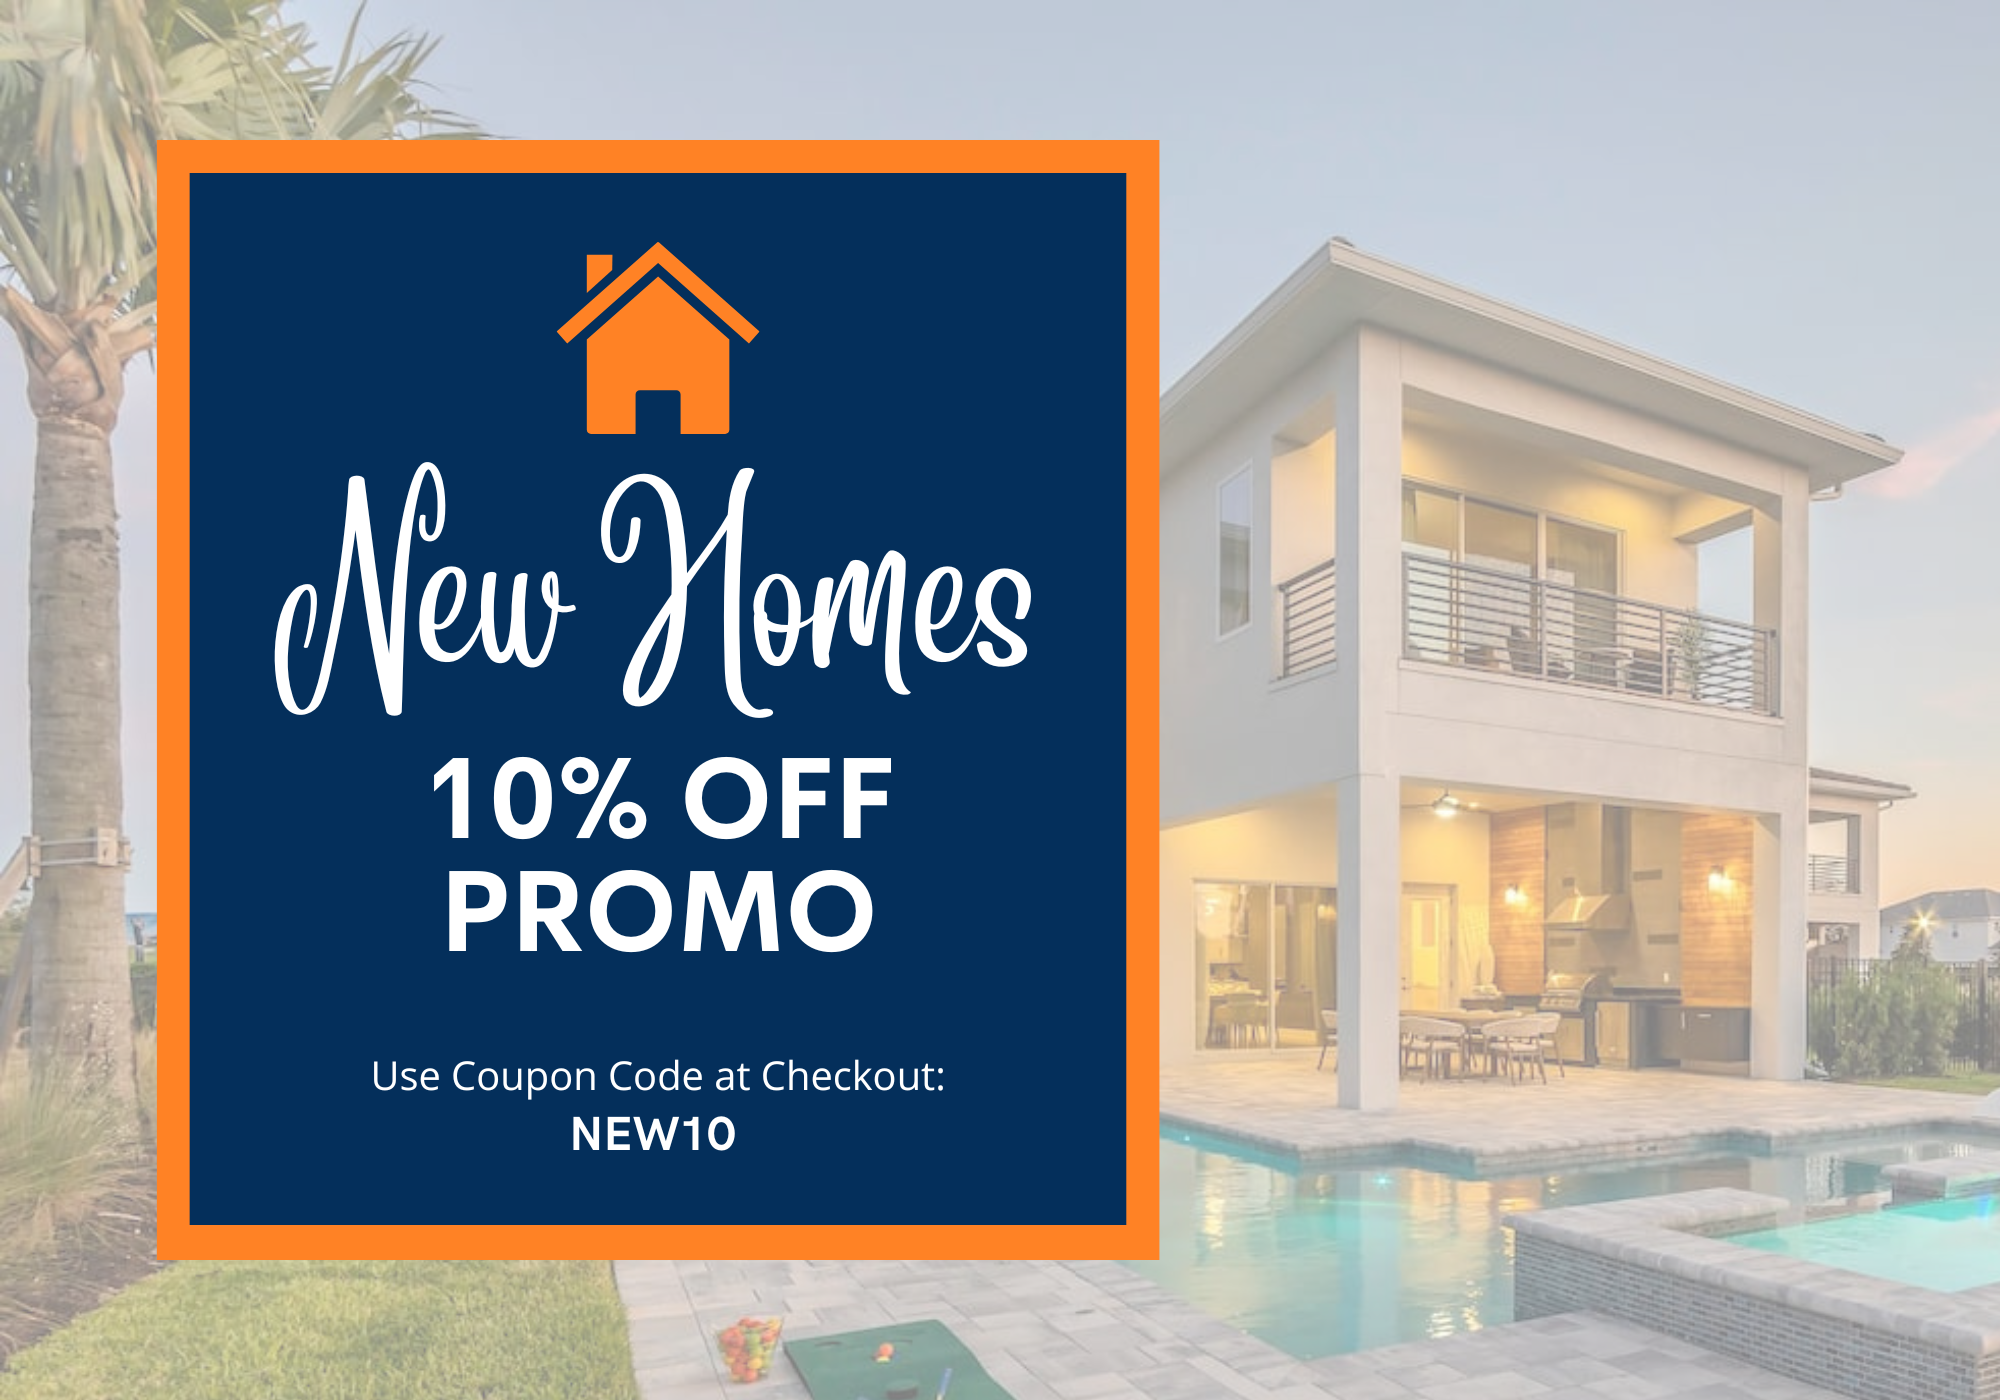 NEW Home Promo Jeeves